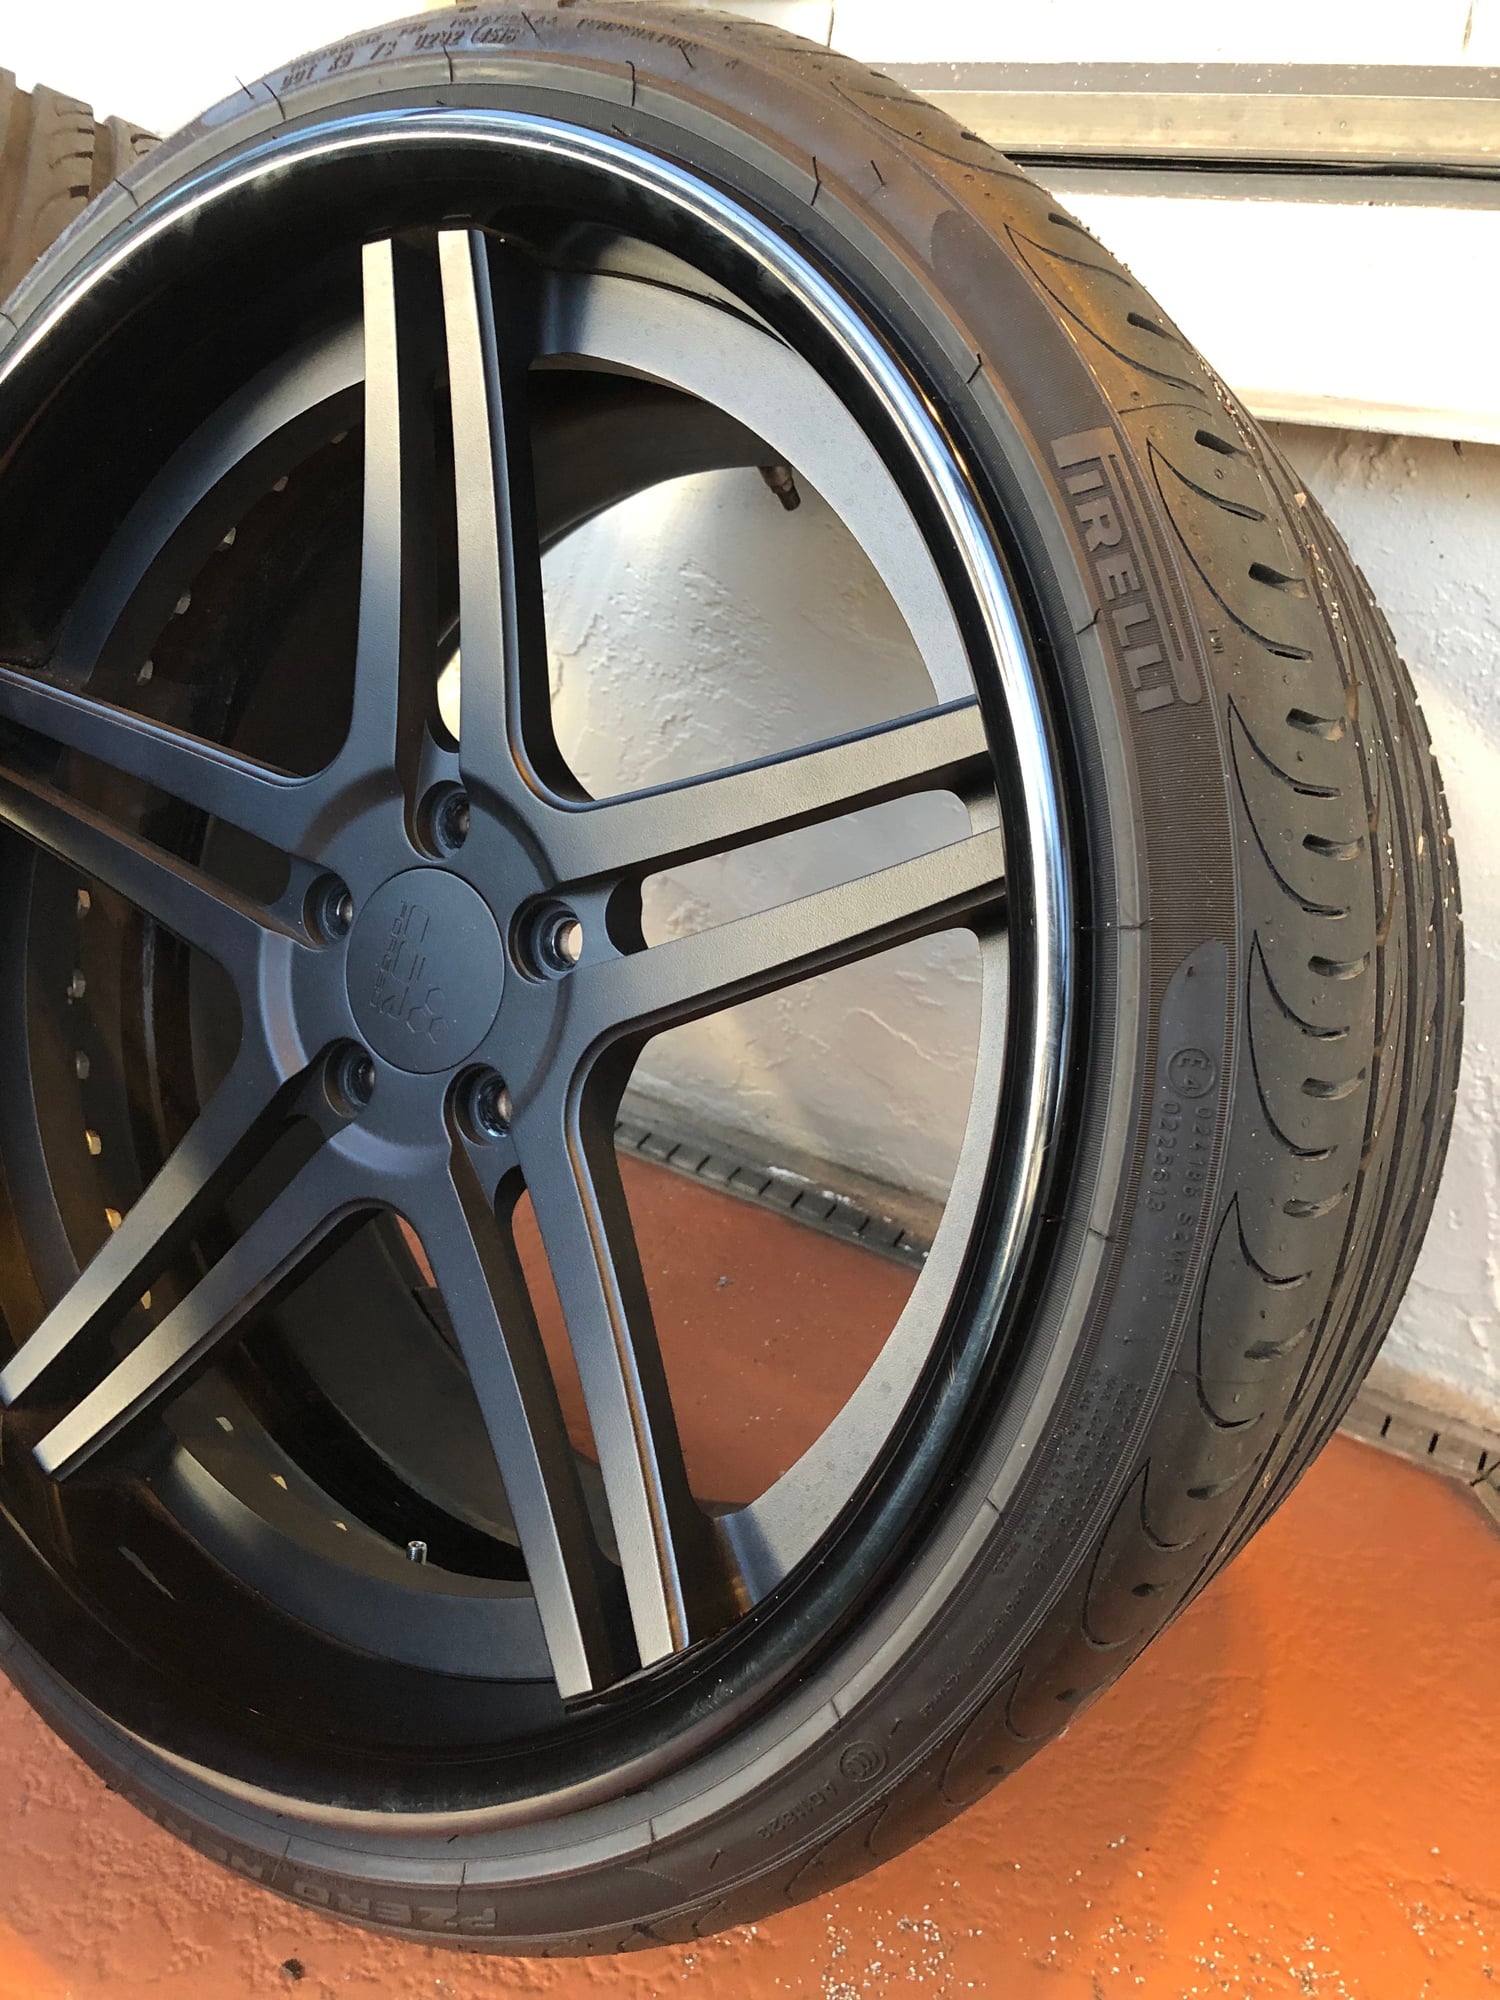 Wheels and Tires/Axles - Cor Custom build 3 piece concave forged  wheels - New - 2010 to 2013 Mercedes-Benz E63 AMG - Delray Beach, FL 33484, United States